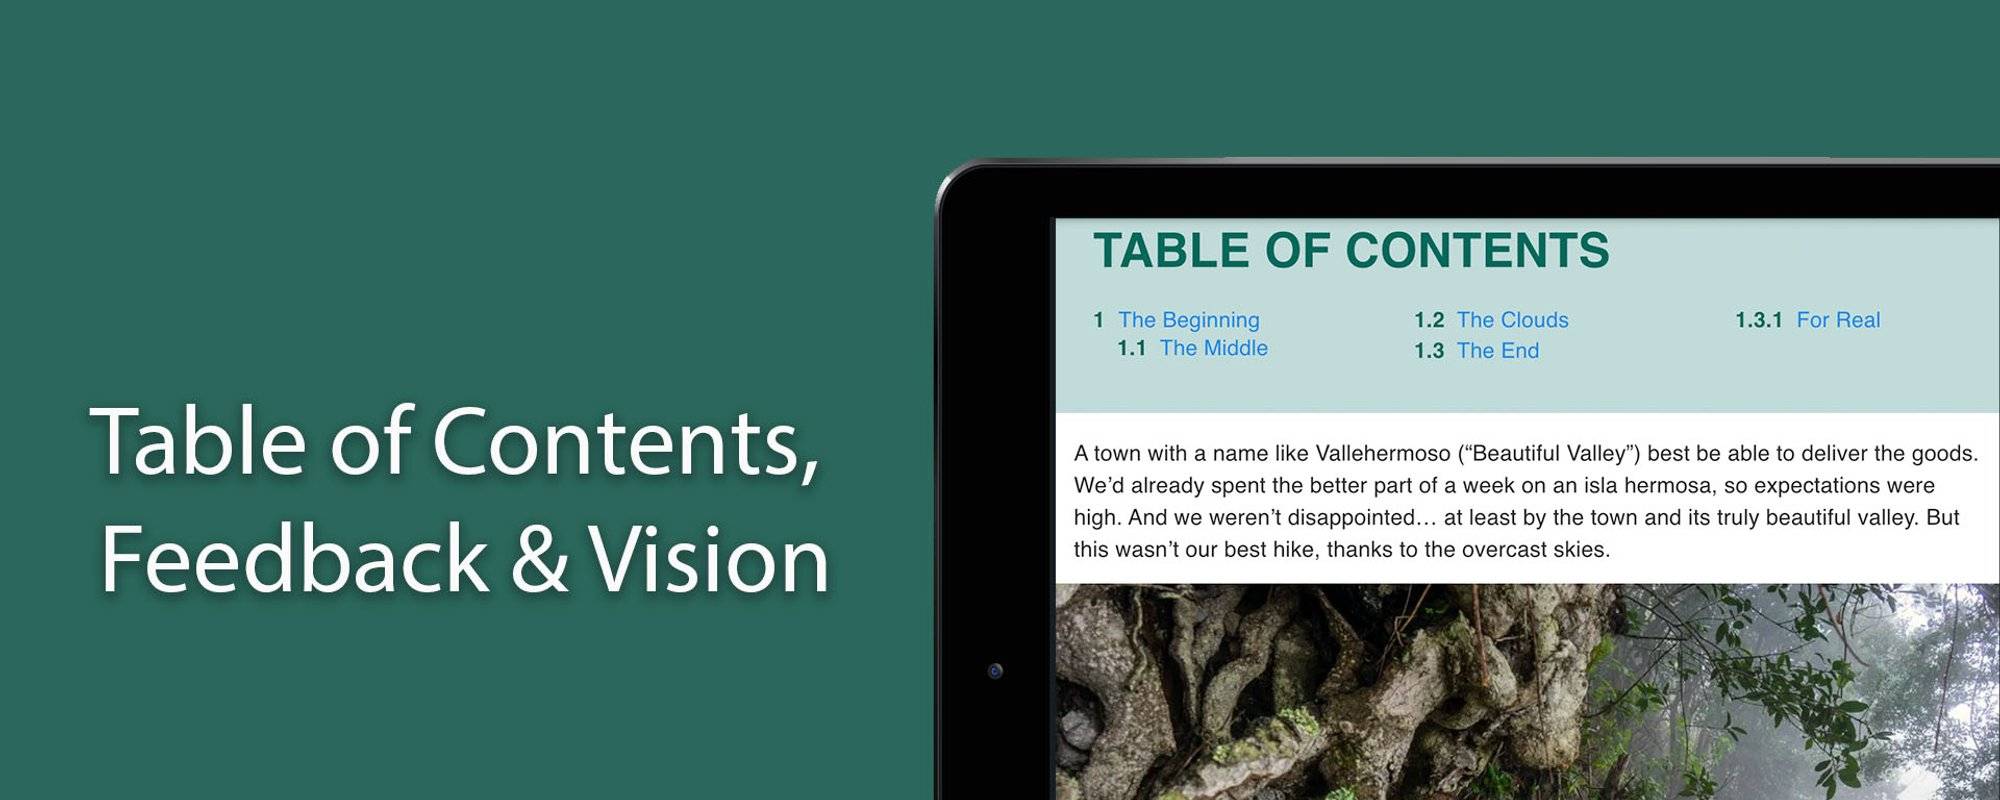 Table of Contents, Feedback & Vision